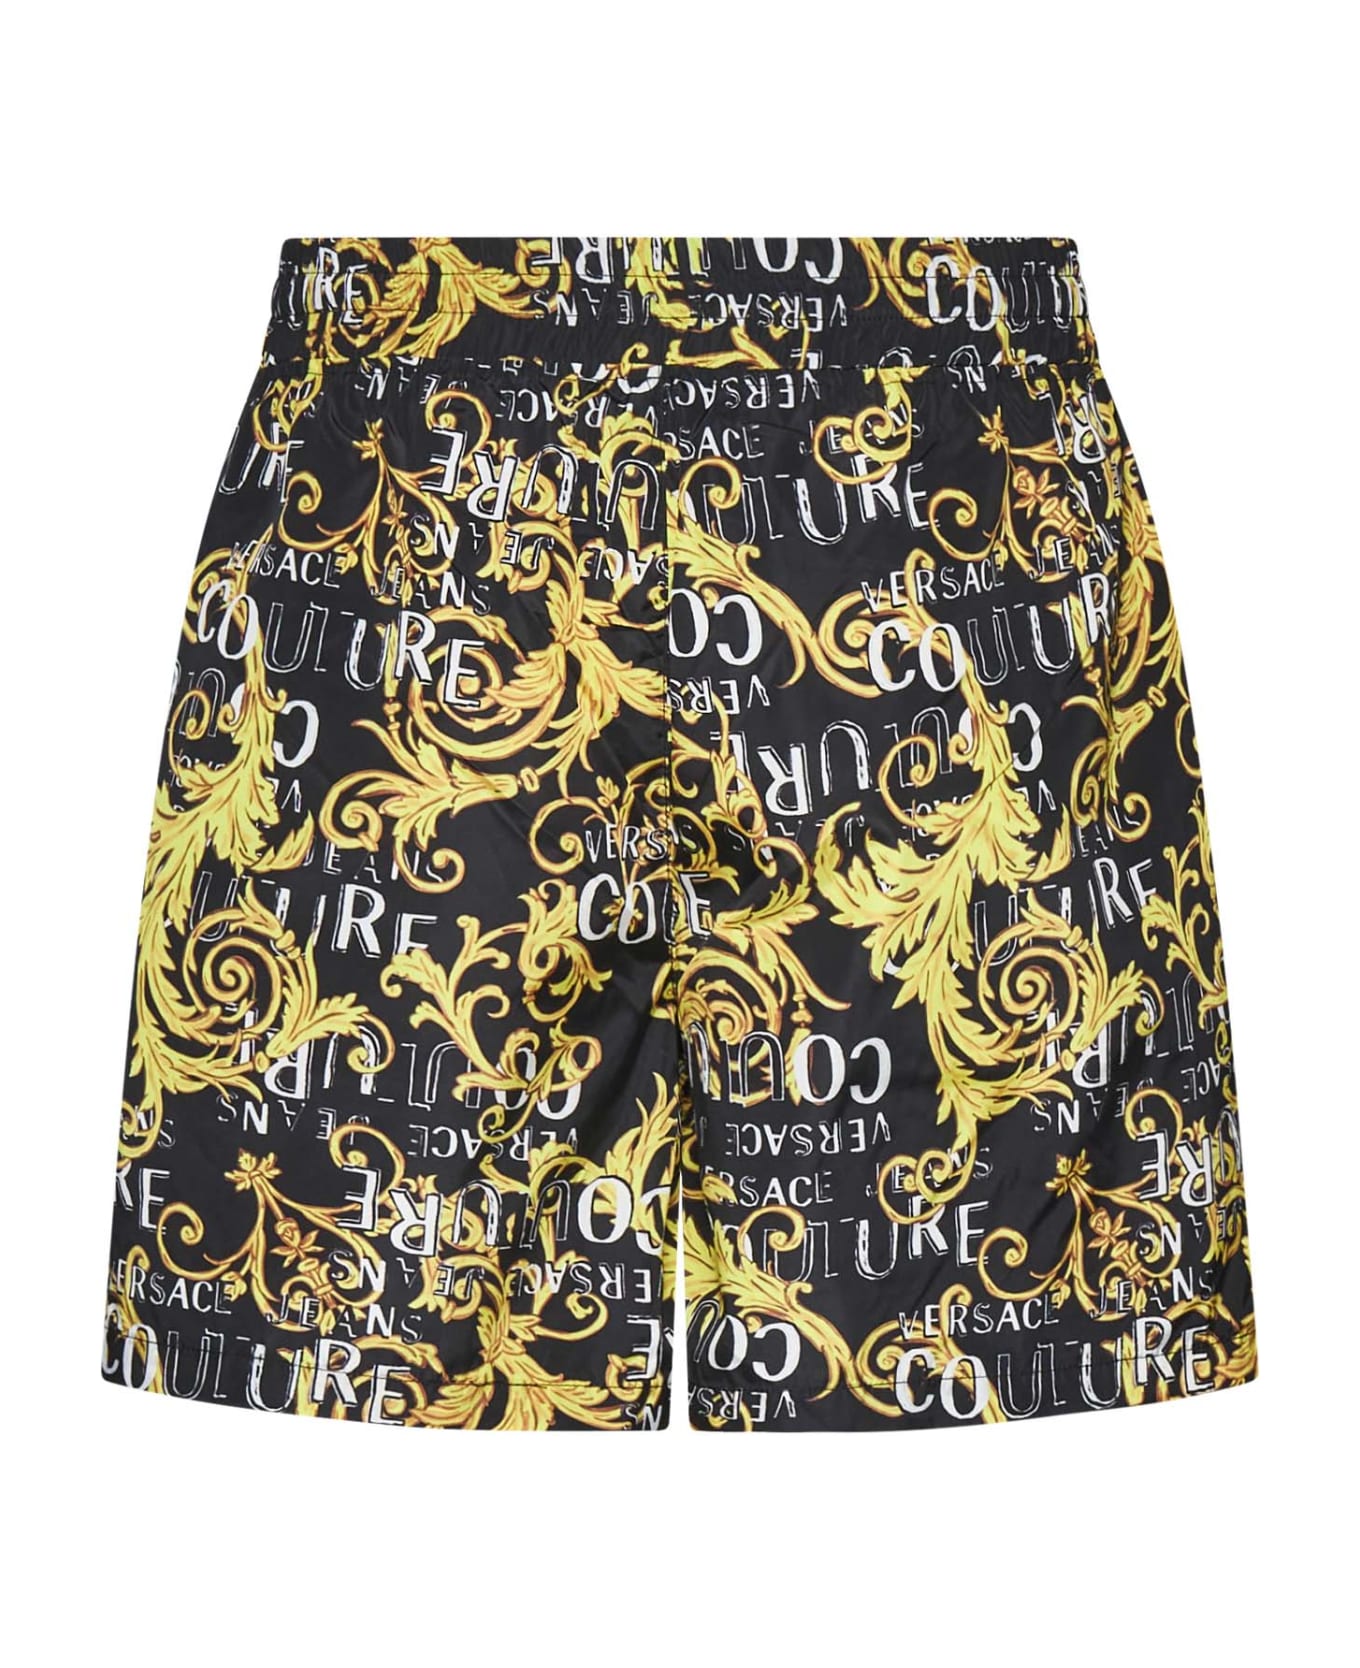 Versace Jeans Couture Shorts - Black Gold